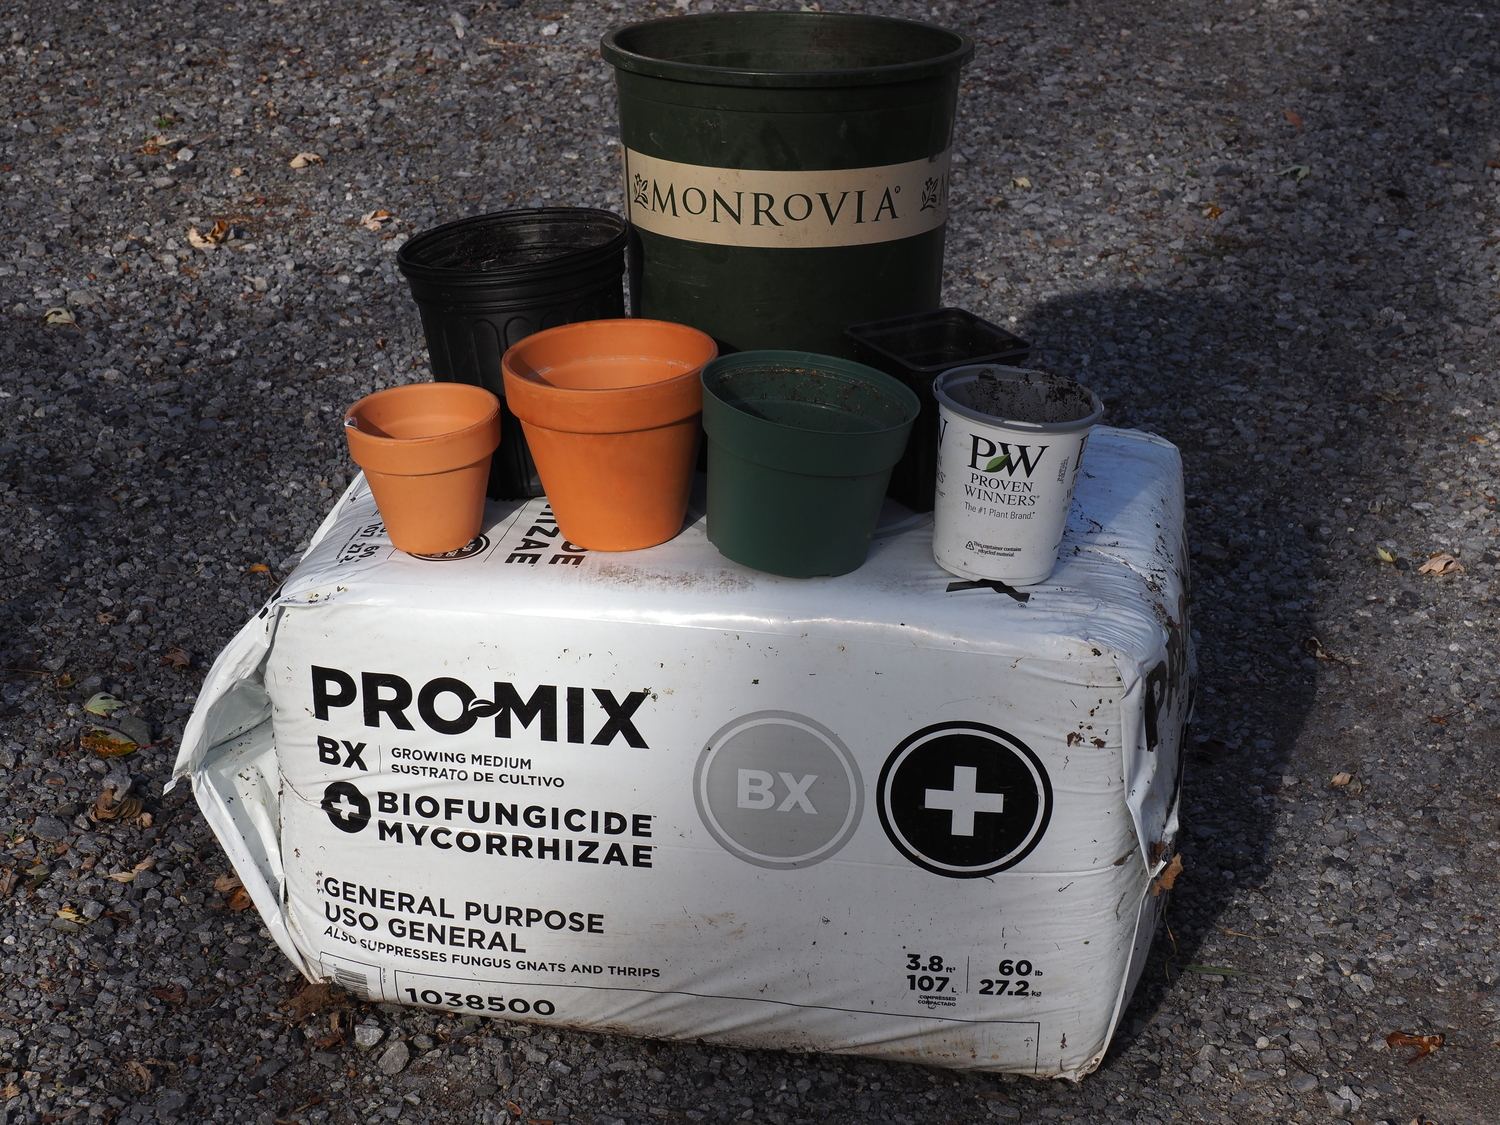 A 4-inch clay pot and 6-inch clay pot on the left, and the rest are plastic pots from 1 pint to 5 gallons in sizes. This was the first chapter in the houseplant revolution of the late 1960s. Chapter two was the bale of soil under the pots. ProMix was the first commercially available peat-lite or soilless potting mix, and you can buy it by the bale or in smaller bags for home use.
ANDREW MESSINGER